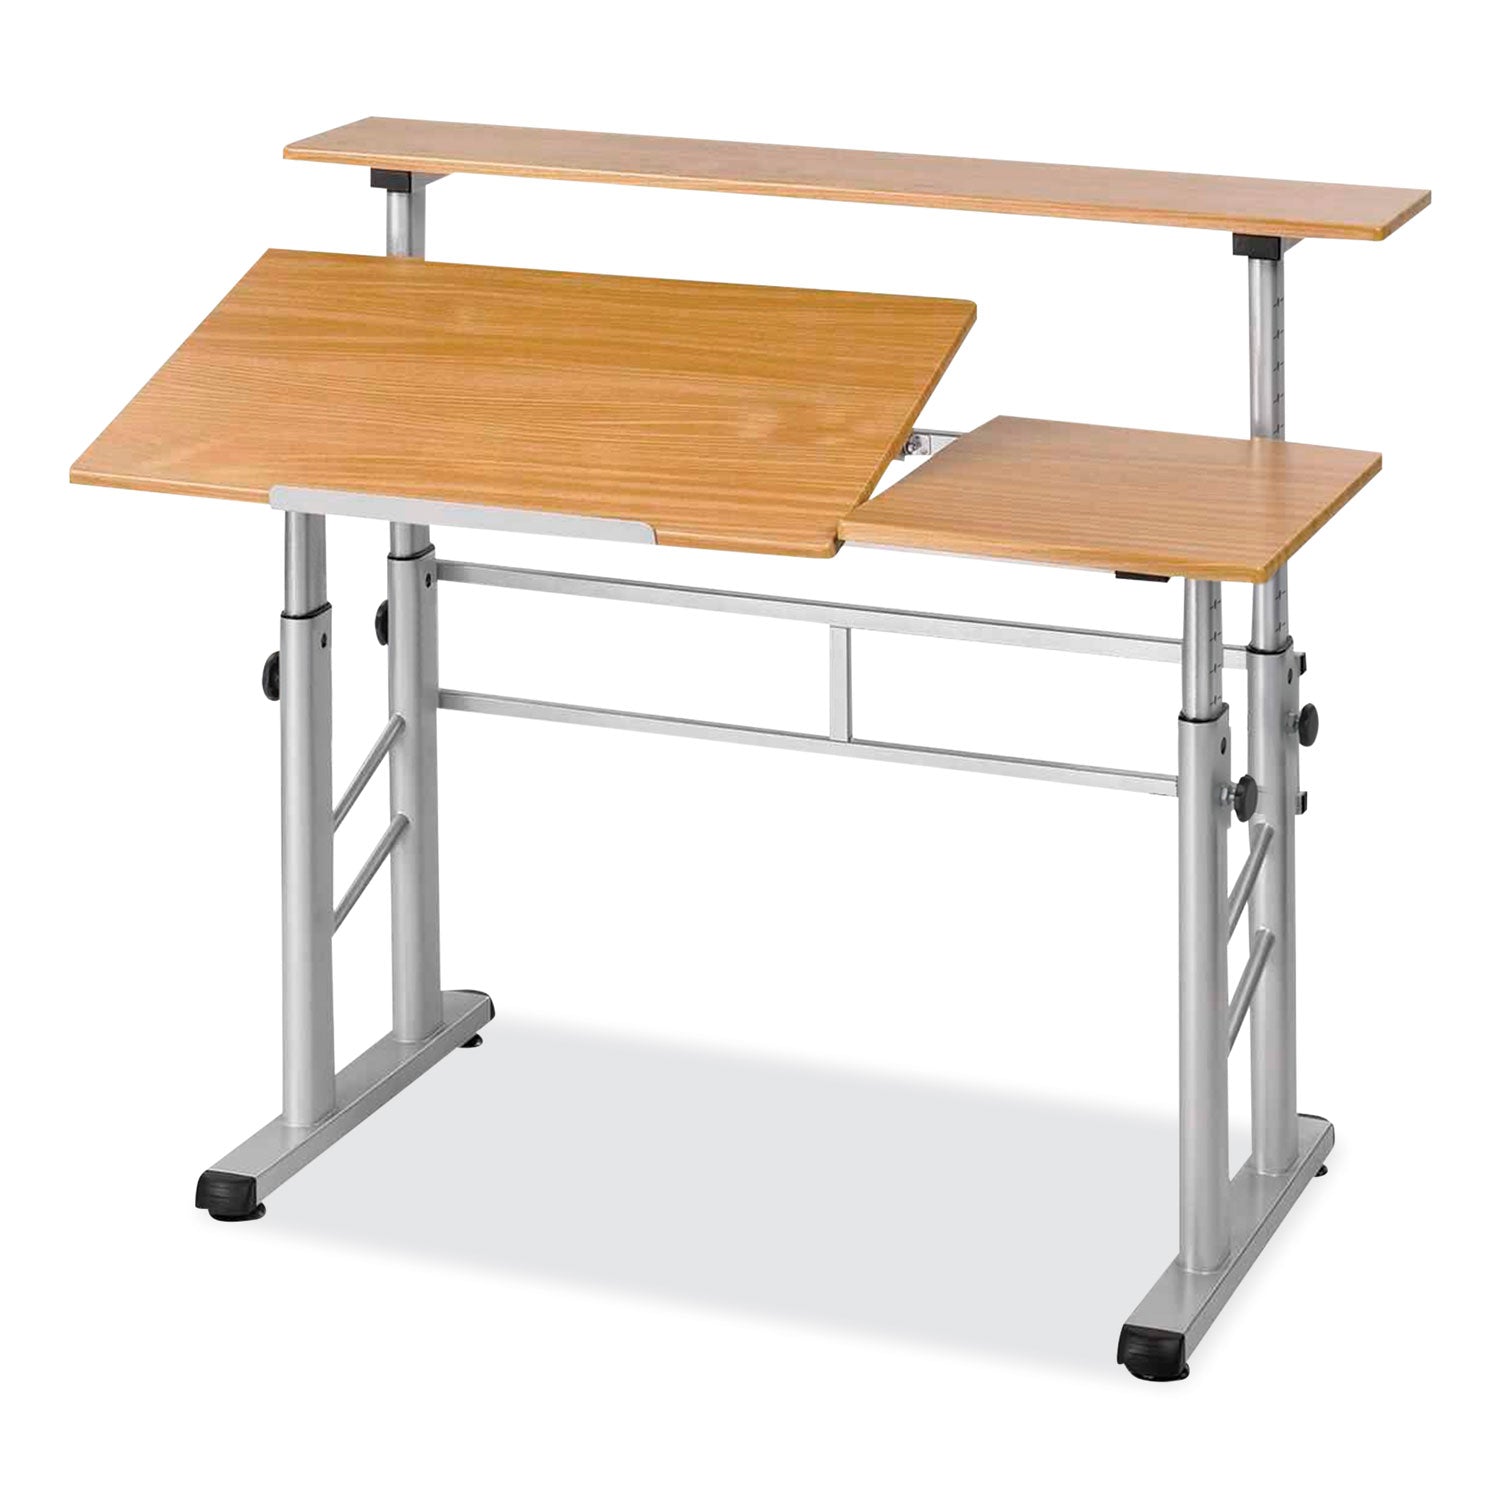 height-adjust-split-level-drafting-table-rectangular-square-4725x2975x26-to-3725-medium-oak-ships-in-1-3-business-days_saf3965mo - 1